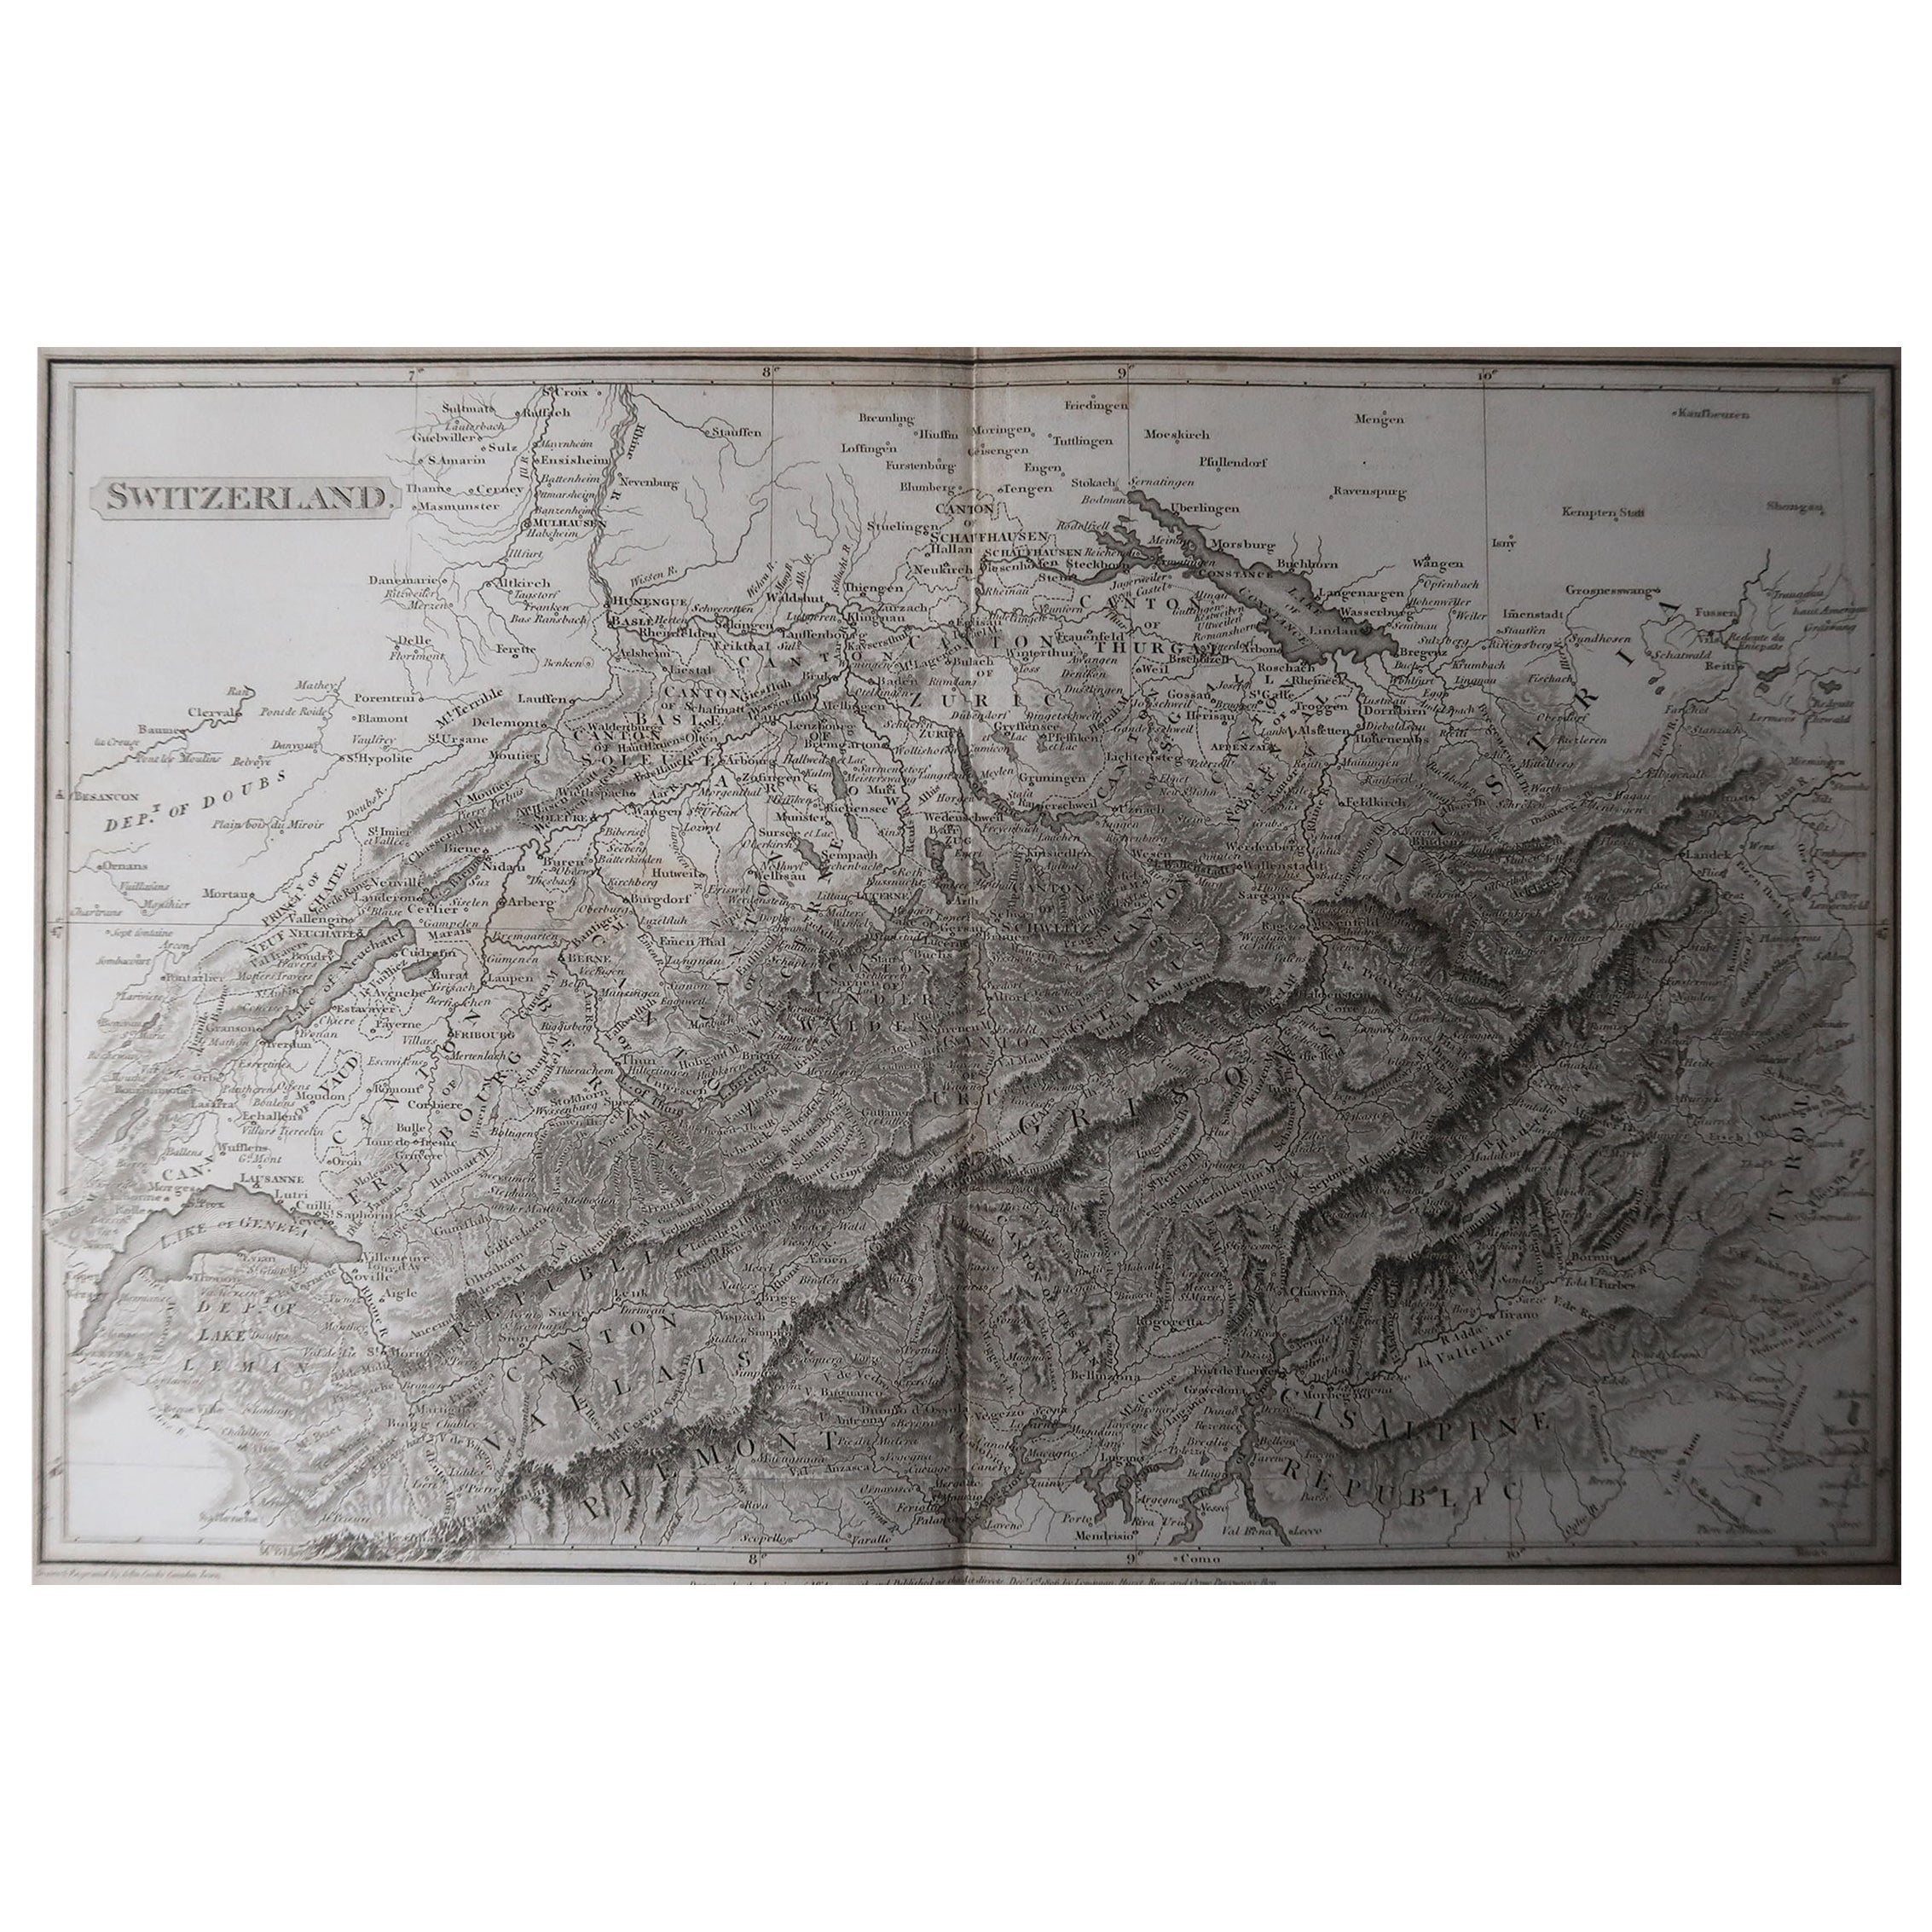 Great map of Switzerland

Drawn under the direction of Arrowsmith

Copper-plate engraving

Published by Longman, Hurst, Rees, Orme and Brown, 1820

Unframed.